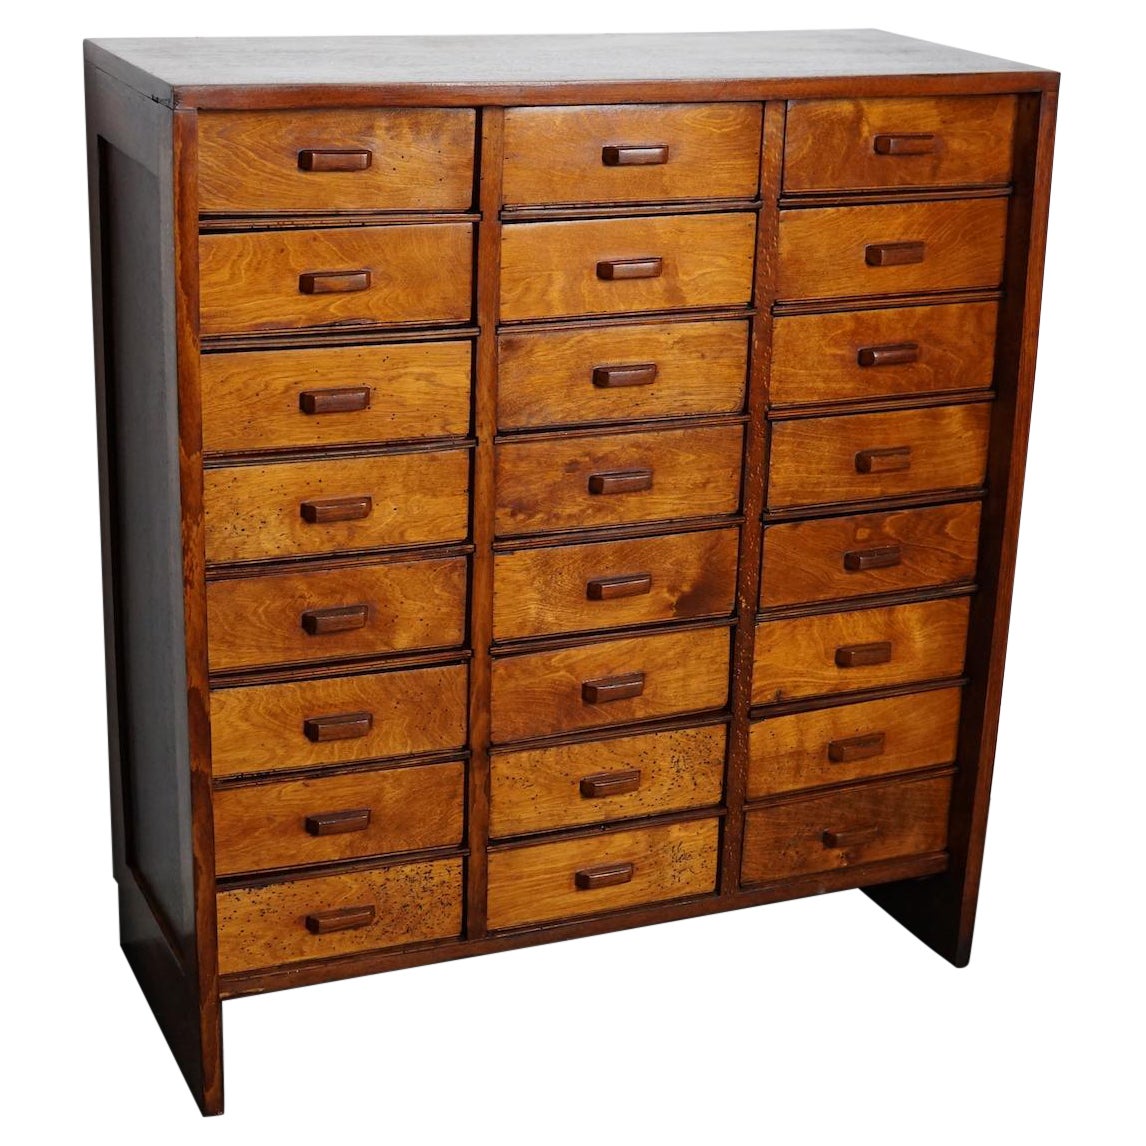 Dutch Industrial Beech and Mahogany Apothecary Cabinet, Mid-20th Century